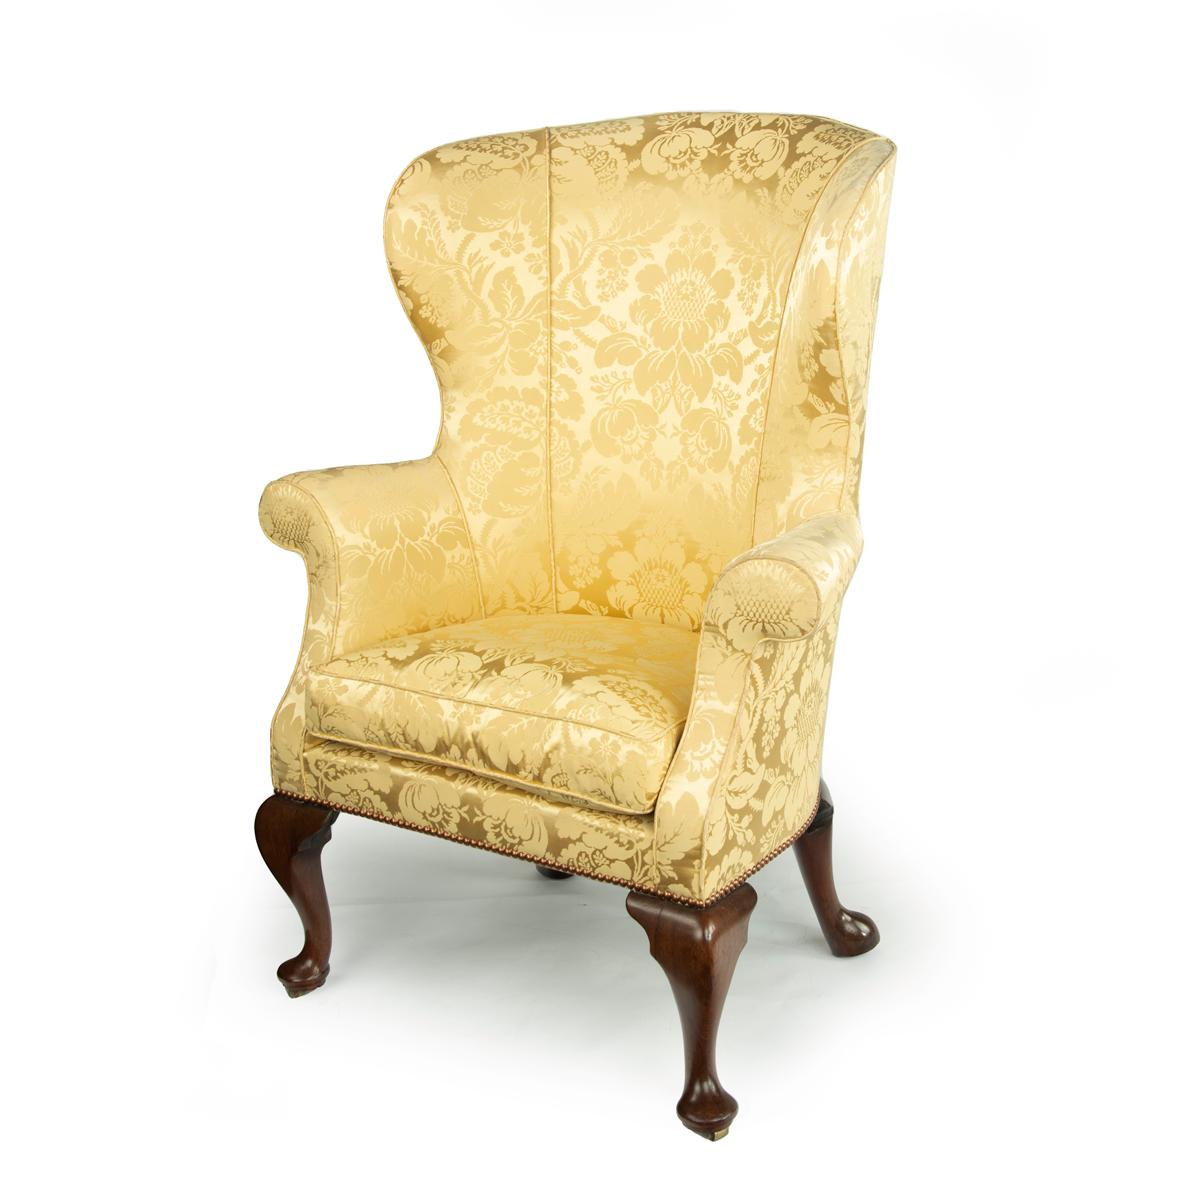 An elegant George I walnut wing armchair, the high barrel back with shallow curving wings and scroll arms, the shallow seat set on four swept cabriole legs with barrel castors enclosed in the pad feet, reupholstered in yellow silk damask. English